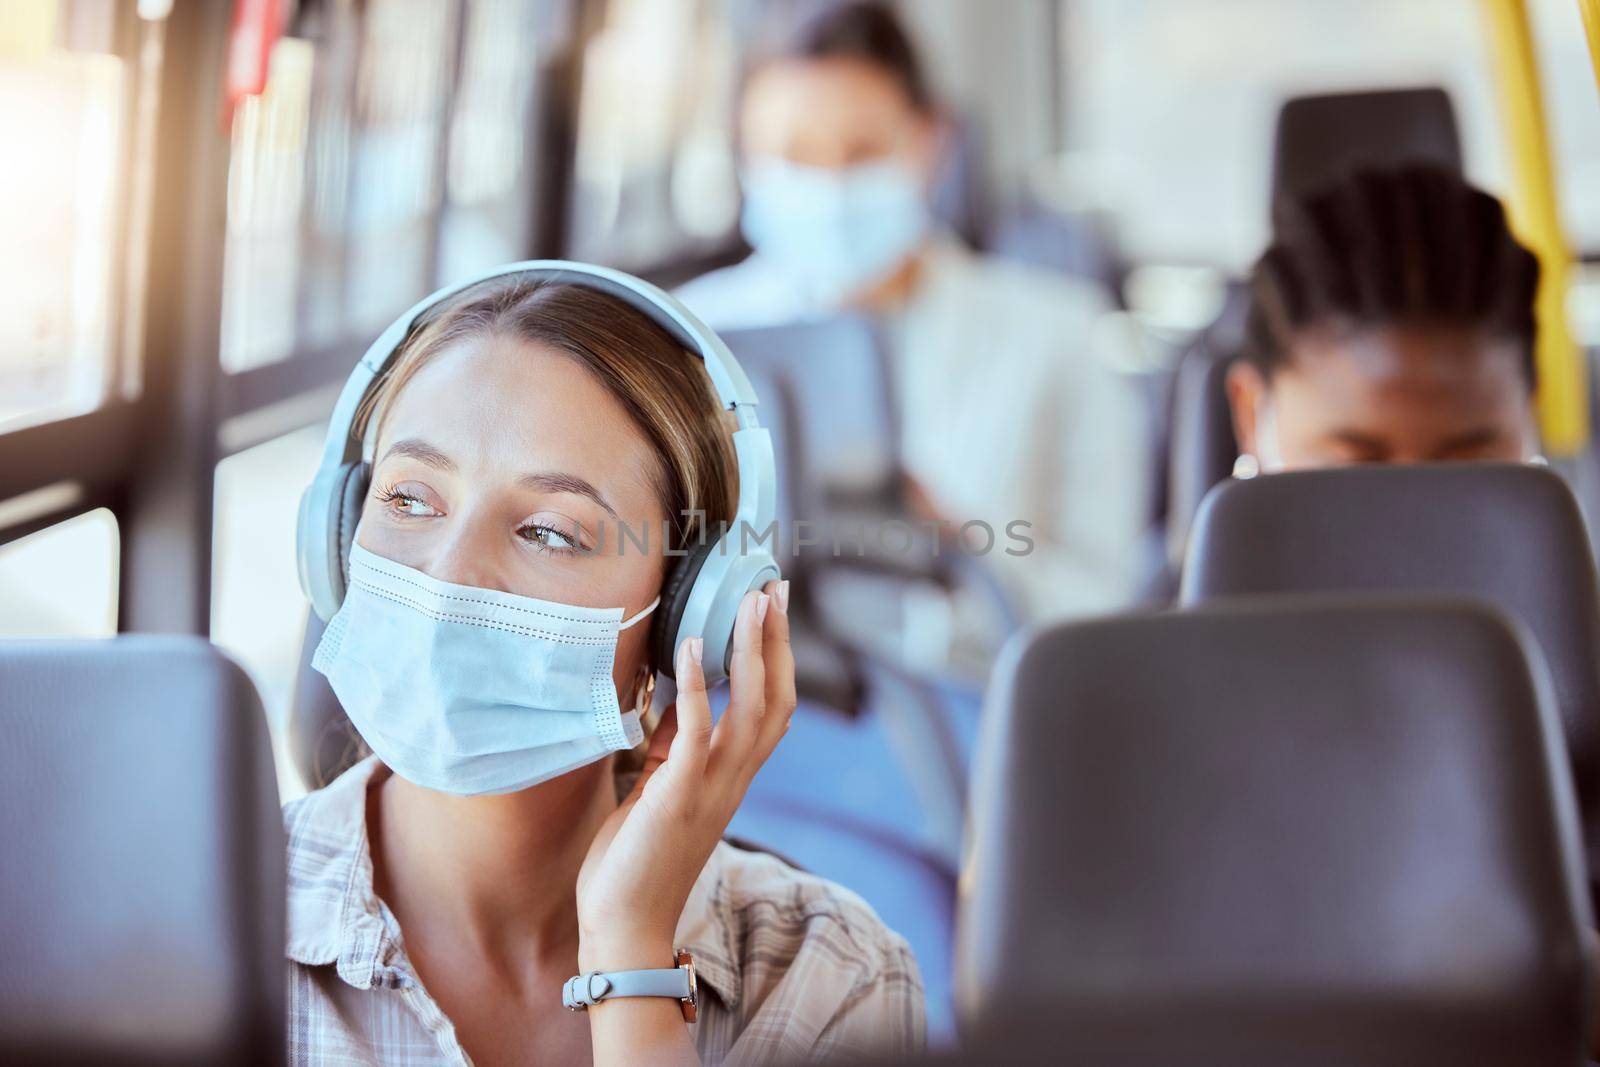 Covid, bus and woman with face mask and headphones listening to podcast on safety compliance, freedom or health risk. Girl city travel or transportation and music for corona virus radio news update by YuriArcurs